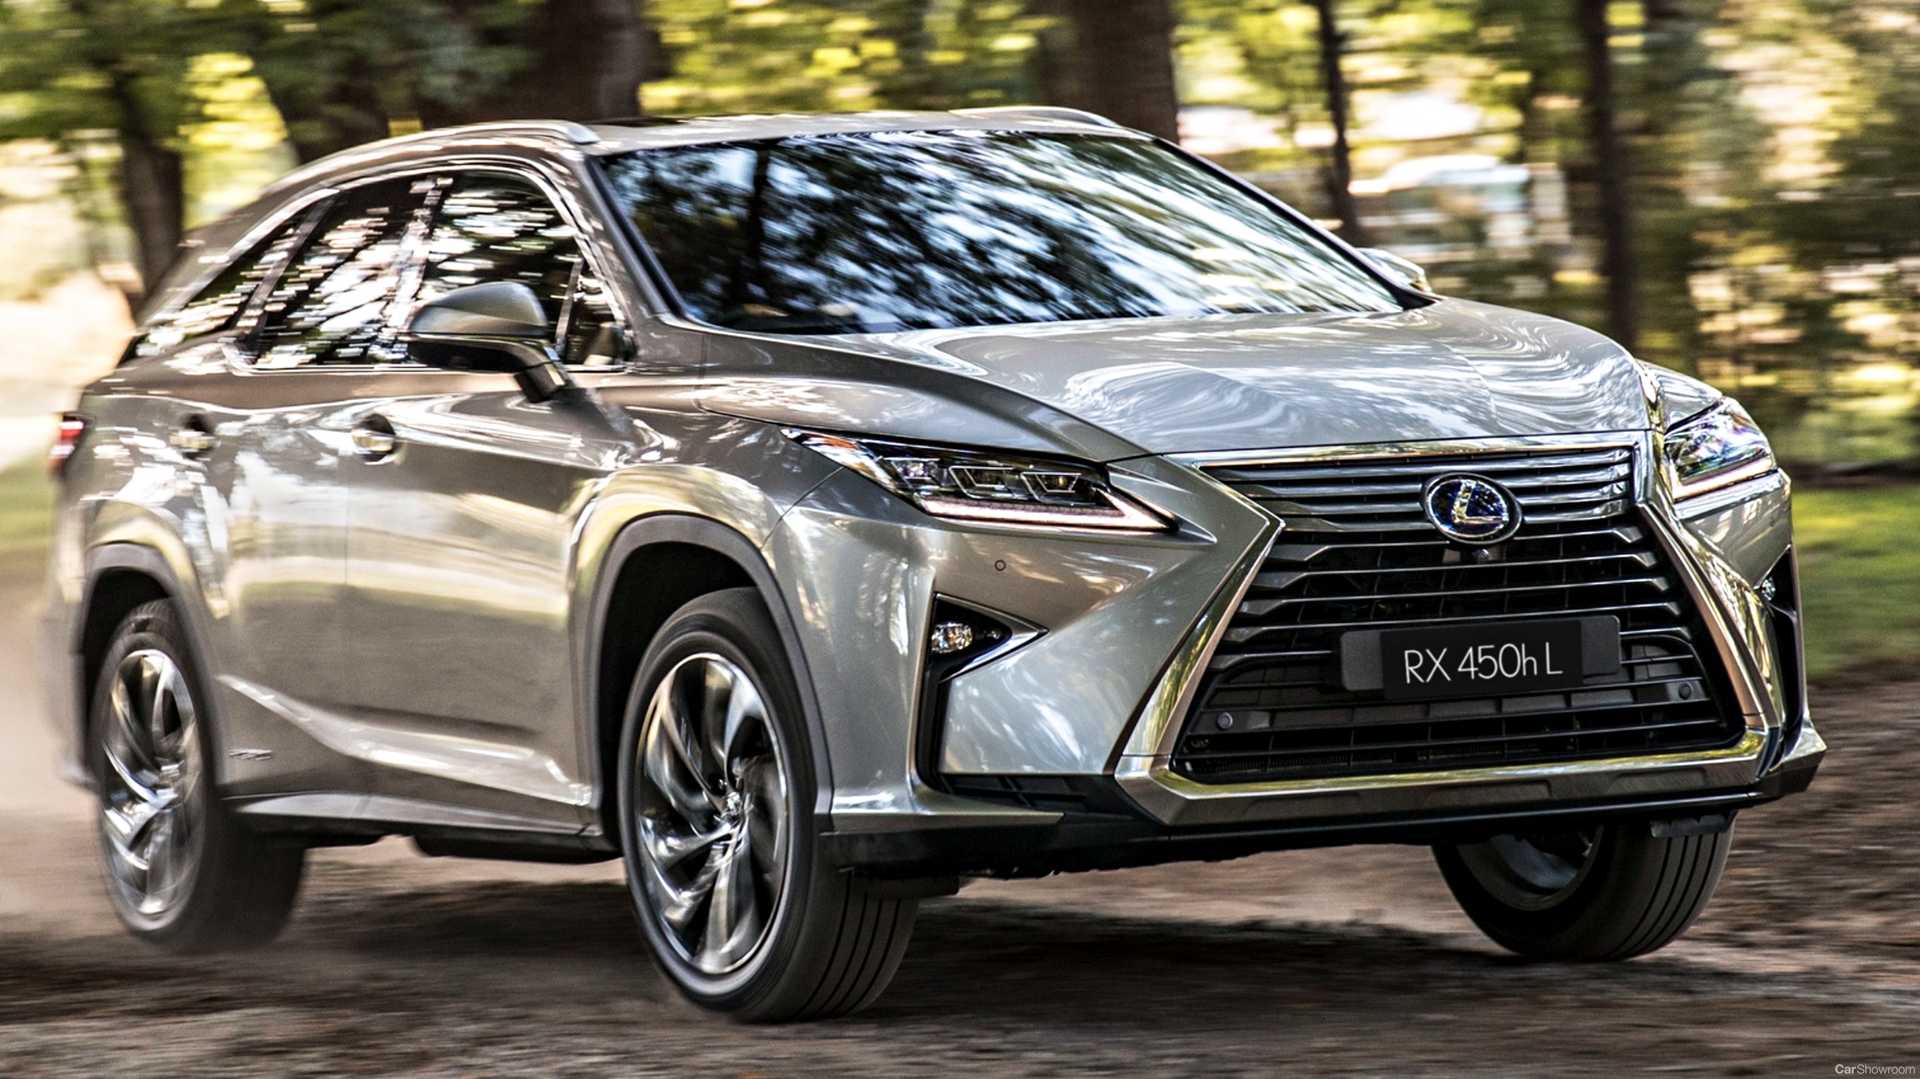 A Mission of LUV Driving the 2018 Lexus RX 450hL and Helping the